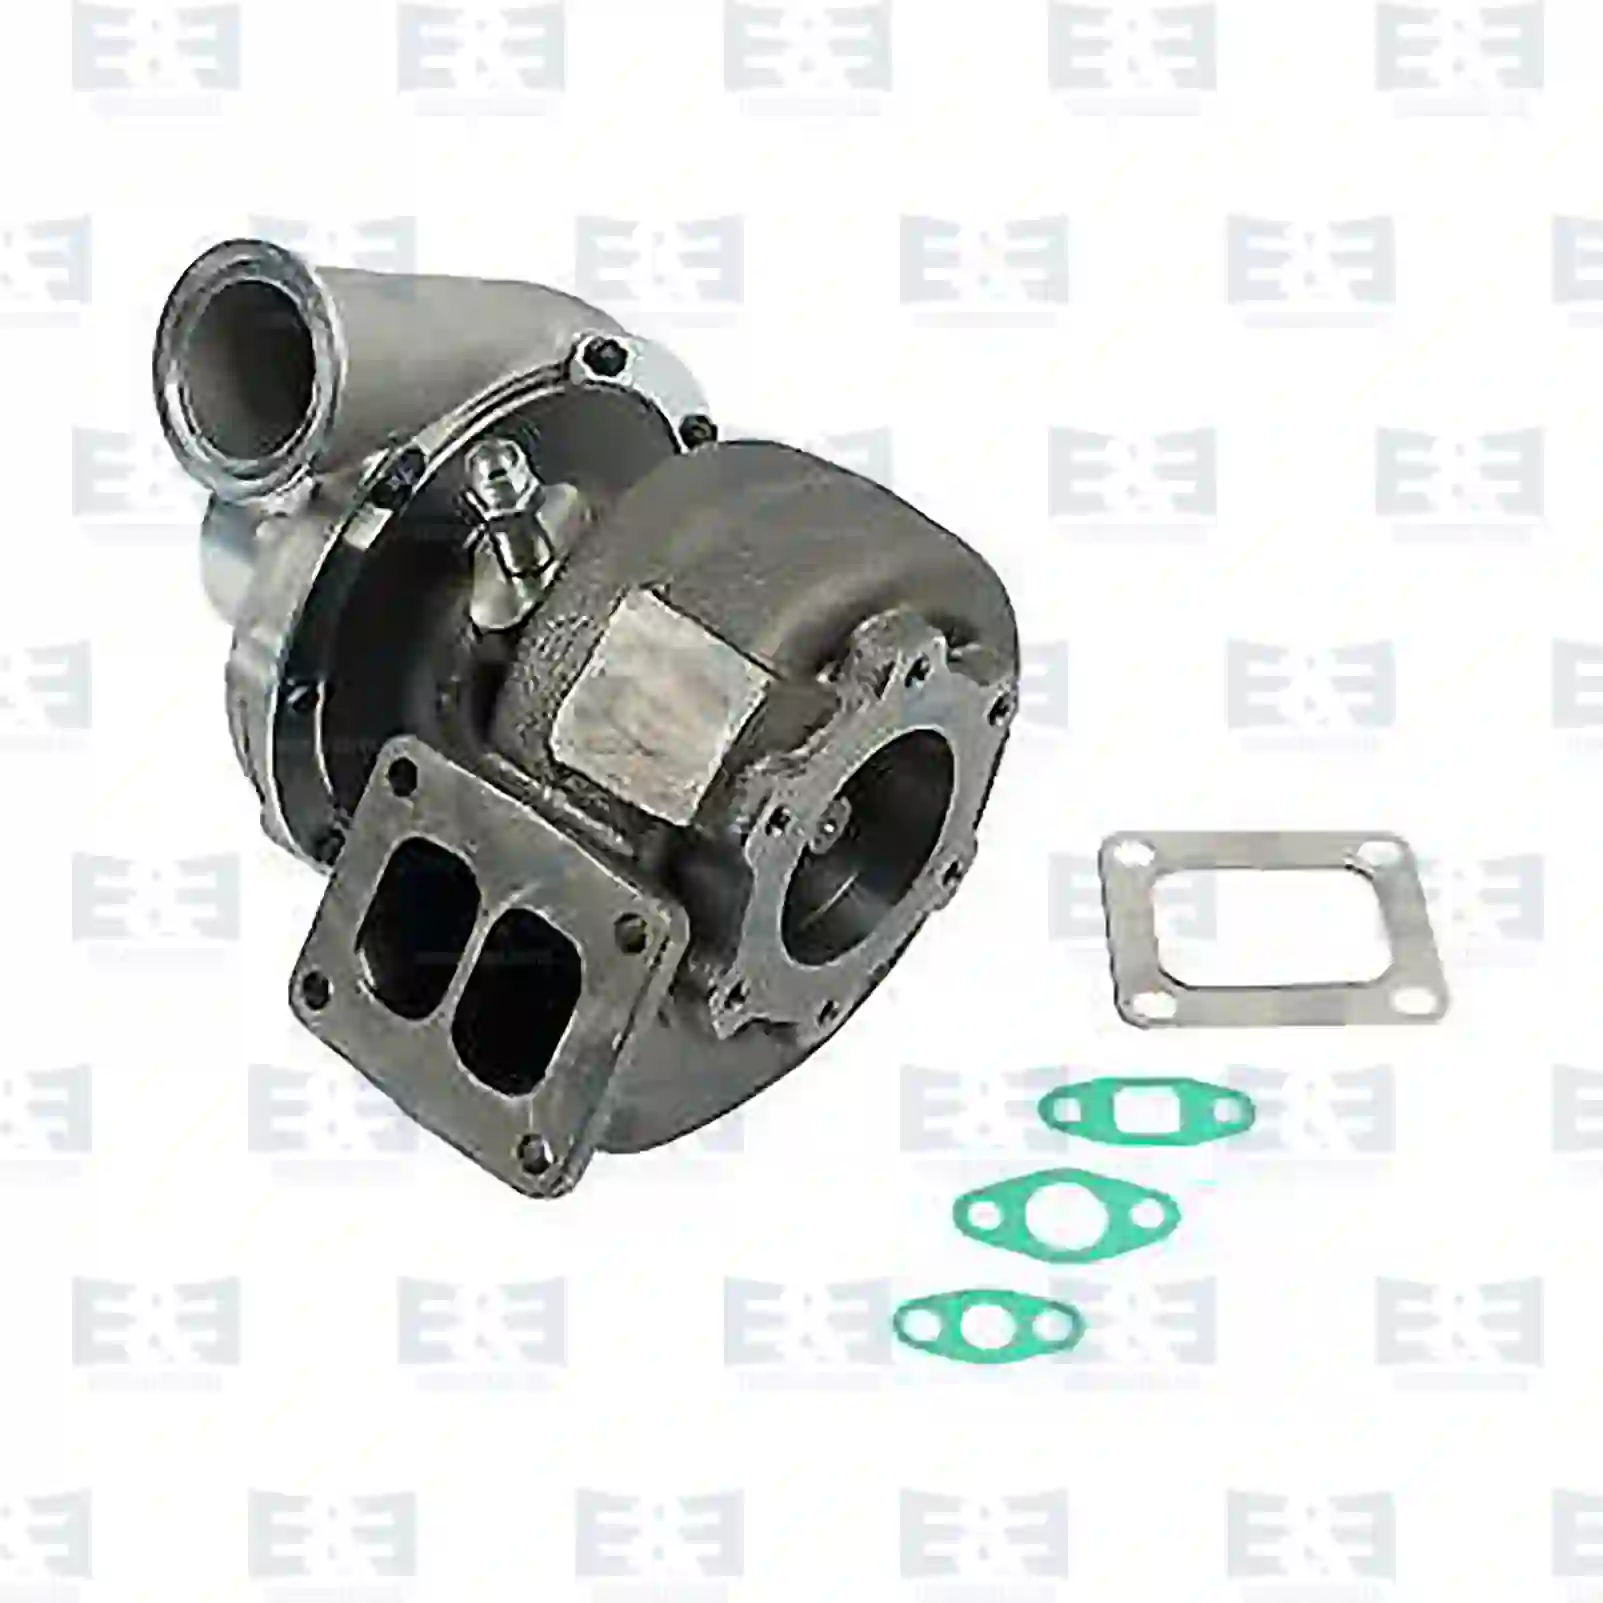 Turbocharger Turbocharger, with gasket kit, EE No 2E2200735 ,  oem no:51091007418, 51091007441, 51091007442, 51091007443, 51091007459, 51091007460, 51091007481, 51091007520, 51091007549, 51091007785, 51091007786, 51091009441, 51091009442, 51091009443, 51091009460, 51091009481, 51091009520, 51091009549, 51091009785, 51091009786, 51091007786 E&E Truck Spare Parts | Truck Spare Parts, Auotomotive Spare Parts